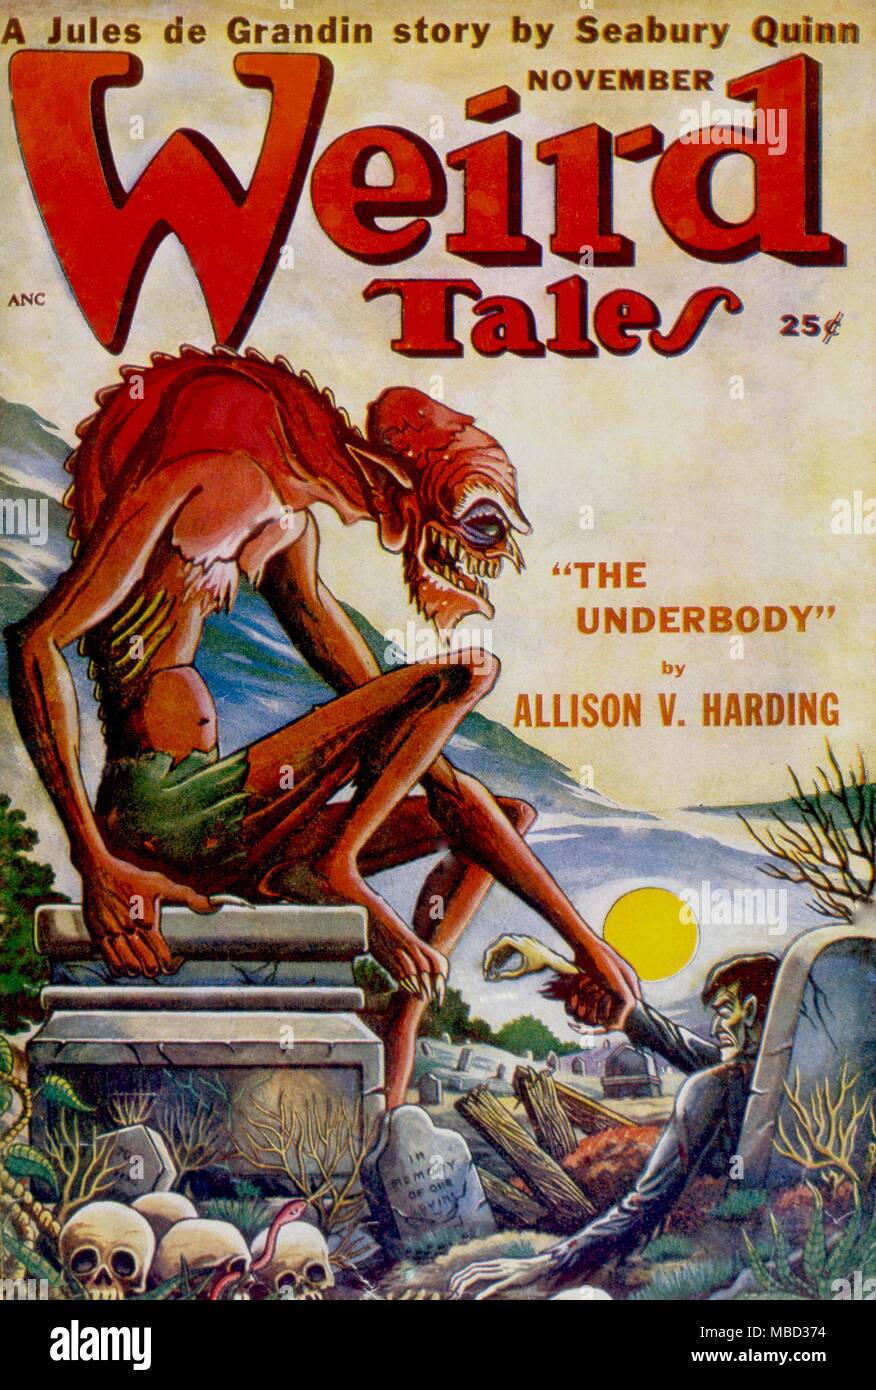 Science Fiction and Horror Magazines Cover of Weird Tales. November 1949. Artwork by Matt Fox. Stock Photo